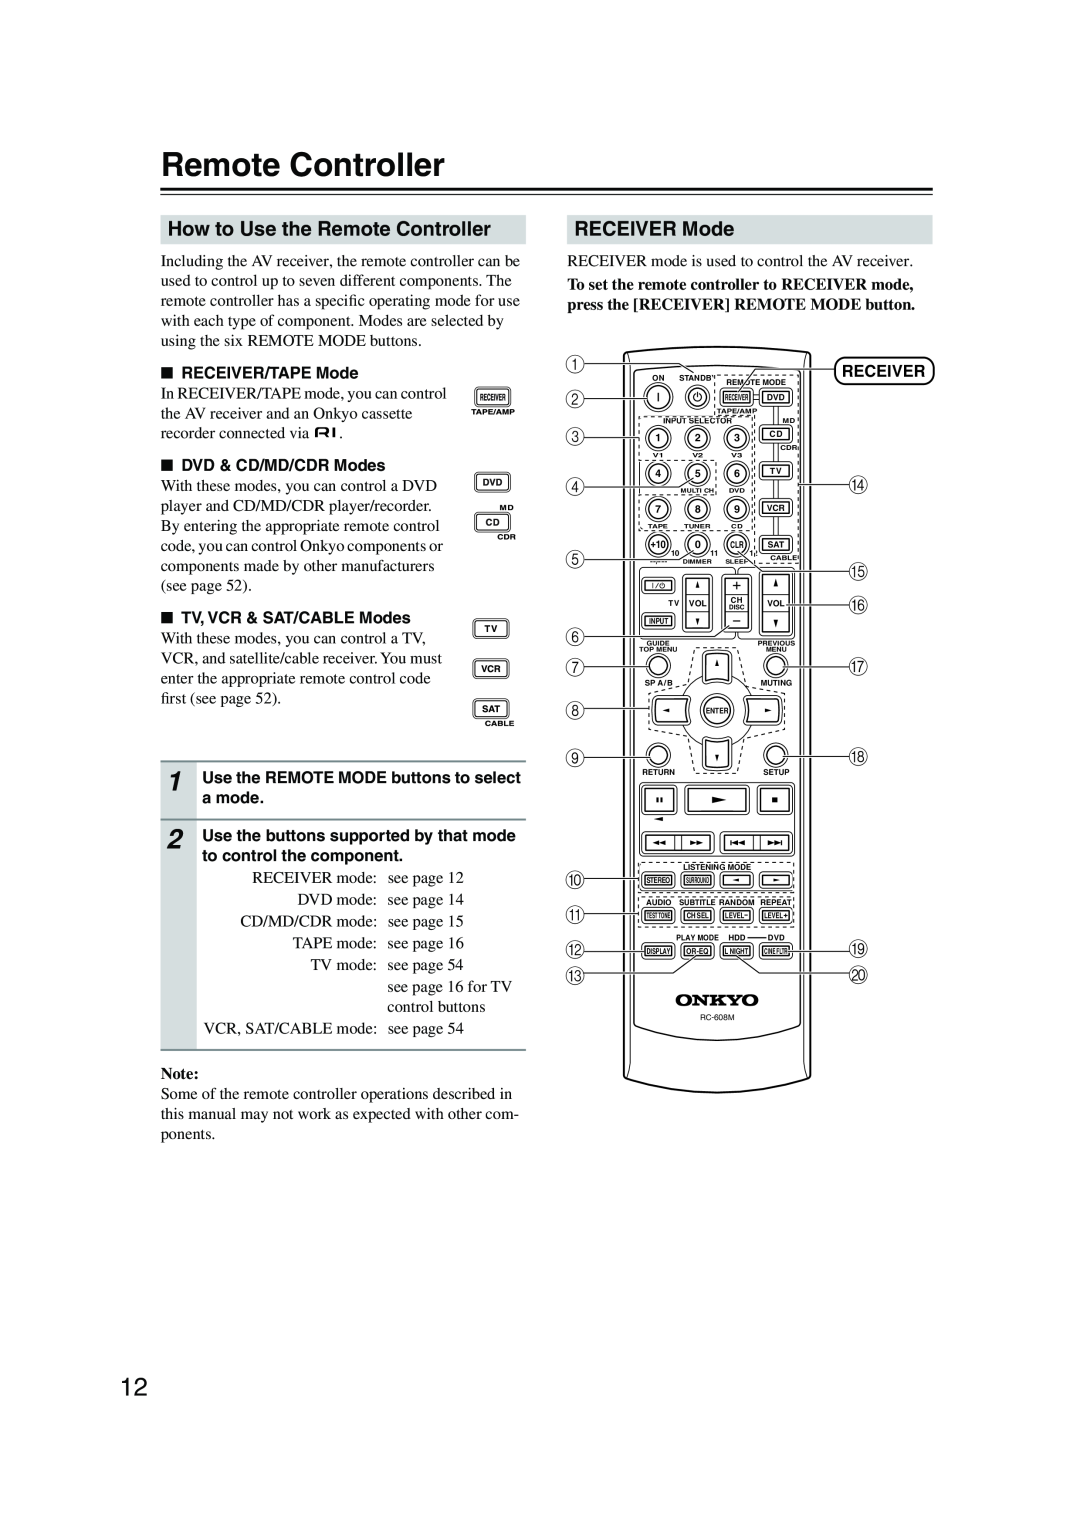 Onkyo HT-S780 instruction manual How to Use the Remote Controller, RECEIVER Mode, A B C D E F G H I, N O P Q R 